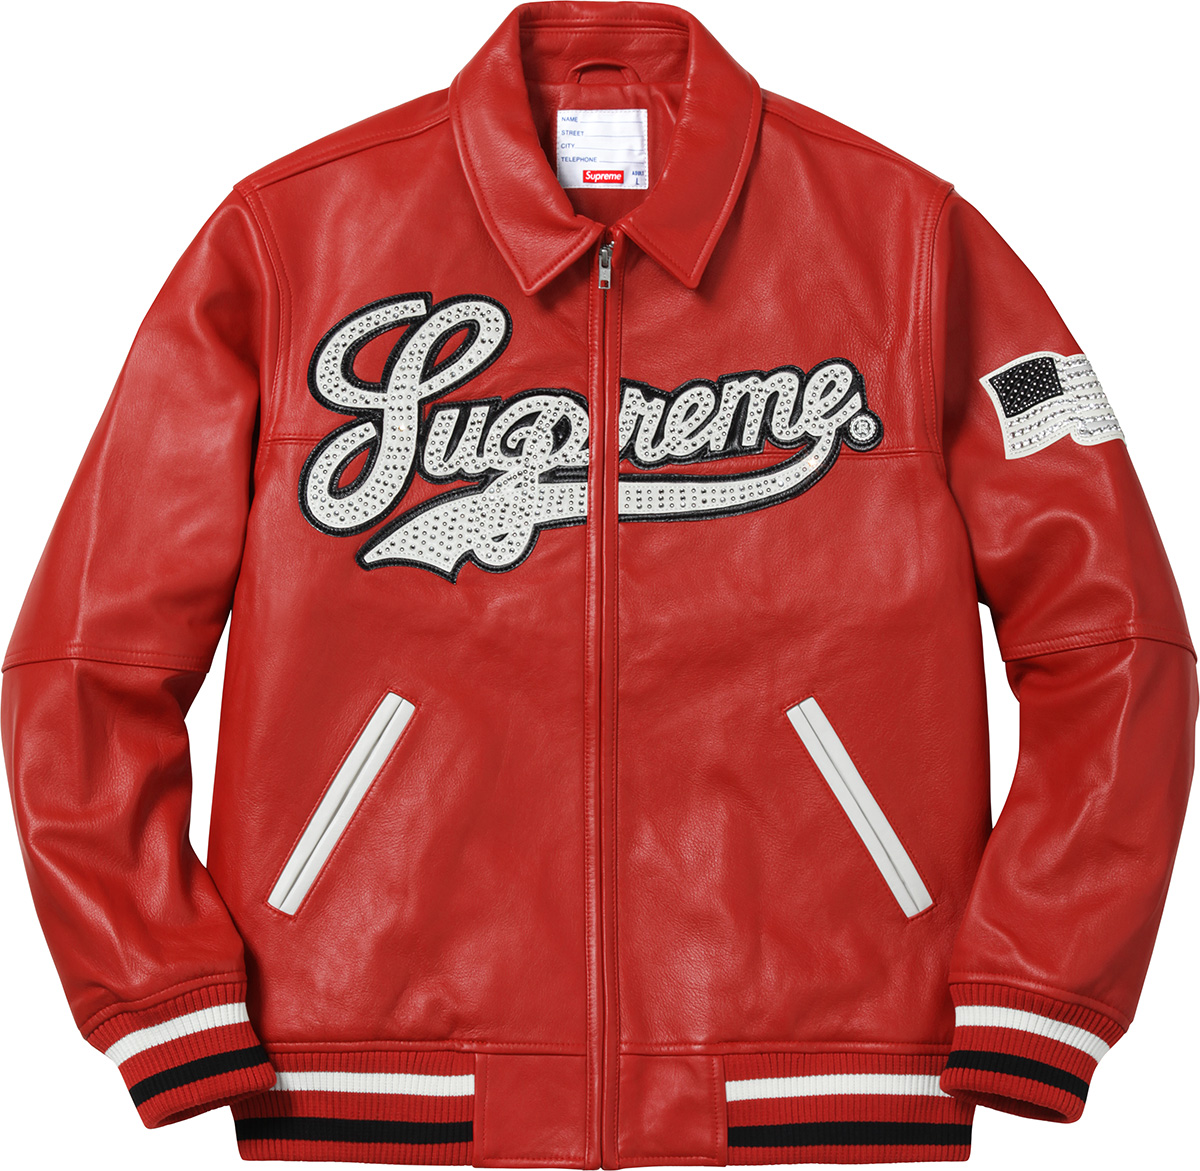 Supreme Uptown Studded Leather Varsity Jacket Red - SS16 - US